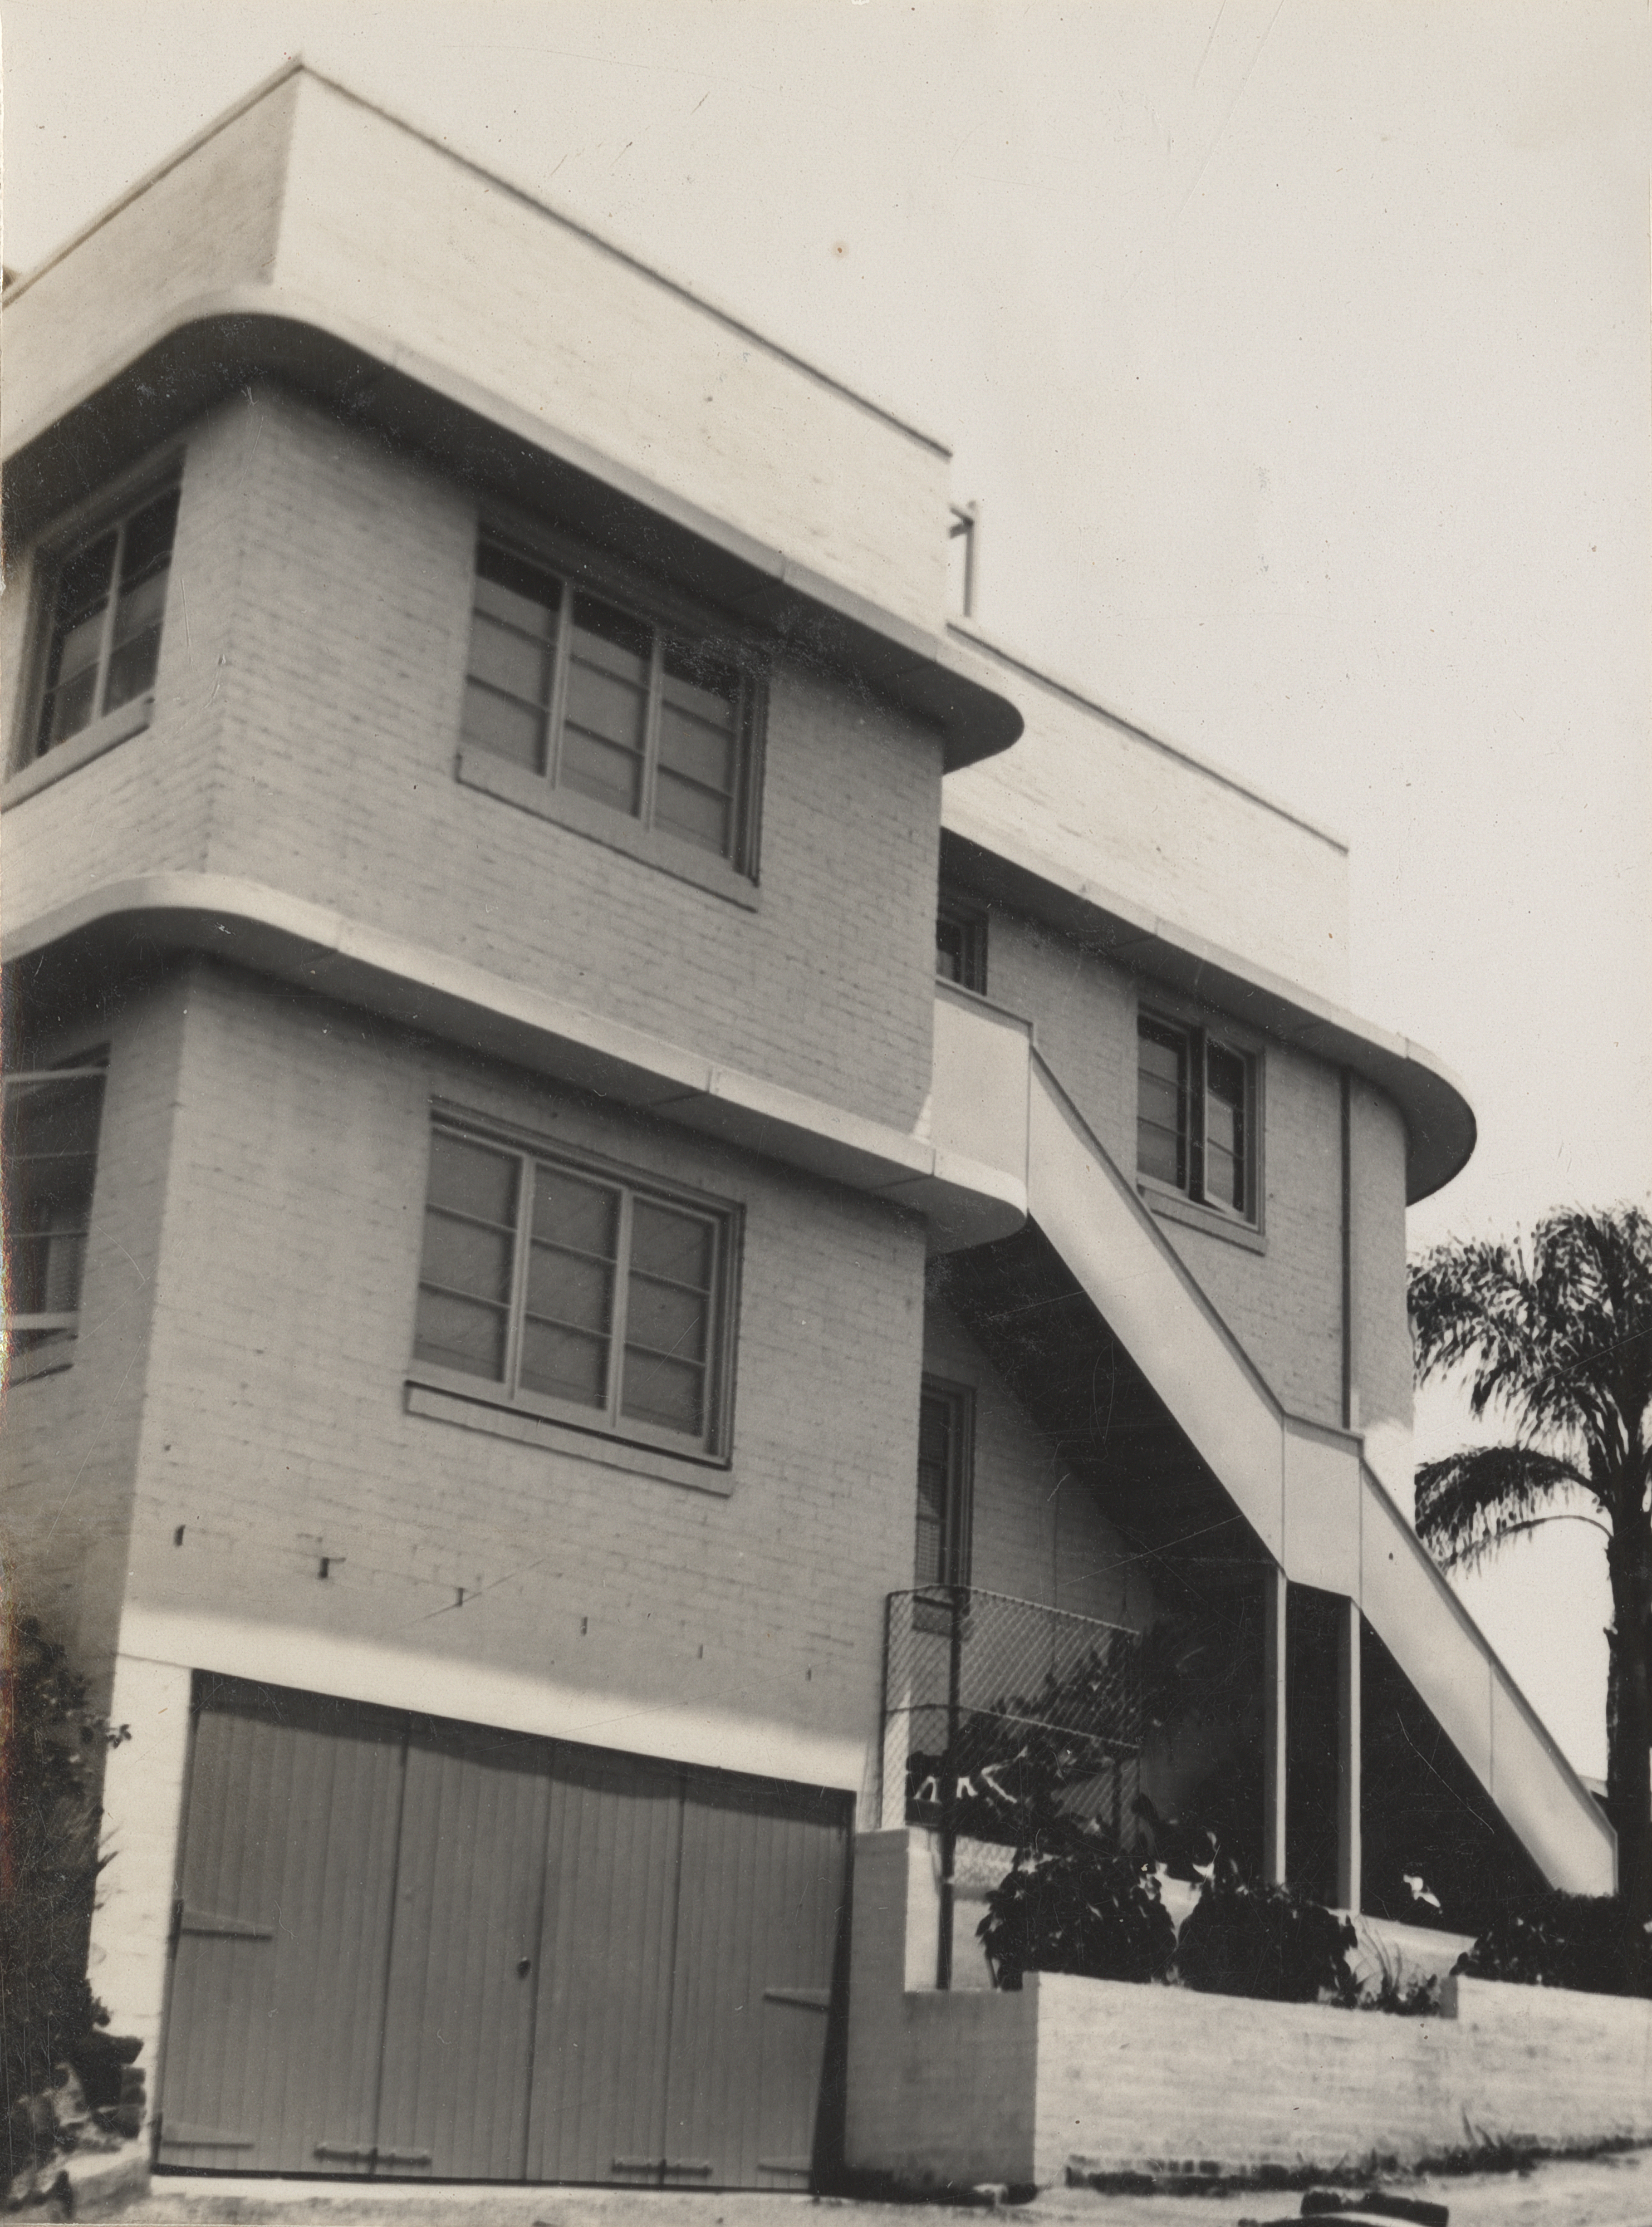  This is an image of ‘Wilbar apartments at Woolloongabba’, undated, viewed from Hawthorne Street, Woolloongabba, looking south-east.